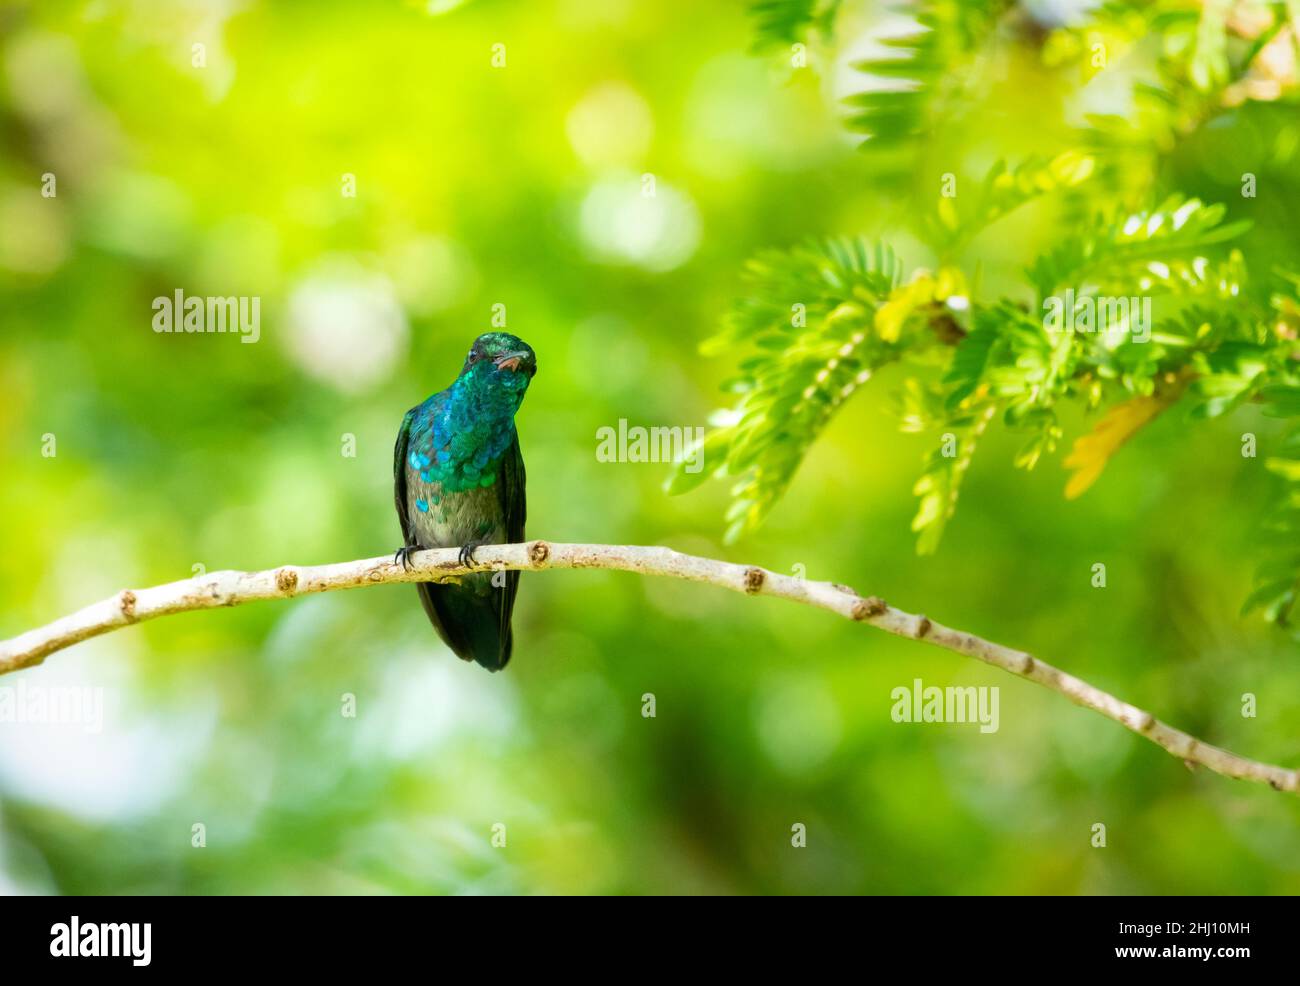 A young Blue-chinned Sapphire hummingbird, Chlorestes notata, curiously looking at the camera with warm bokeh in the background. Stock Photo